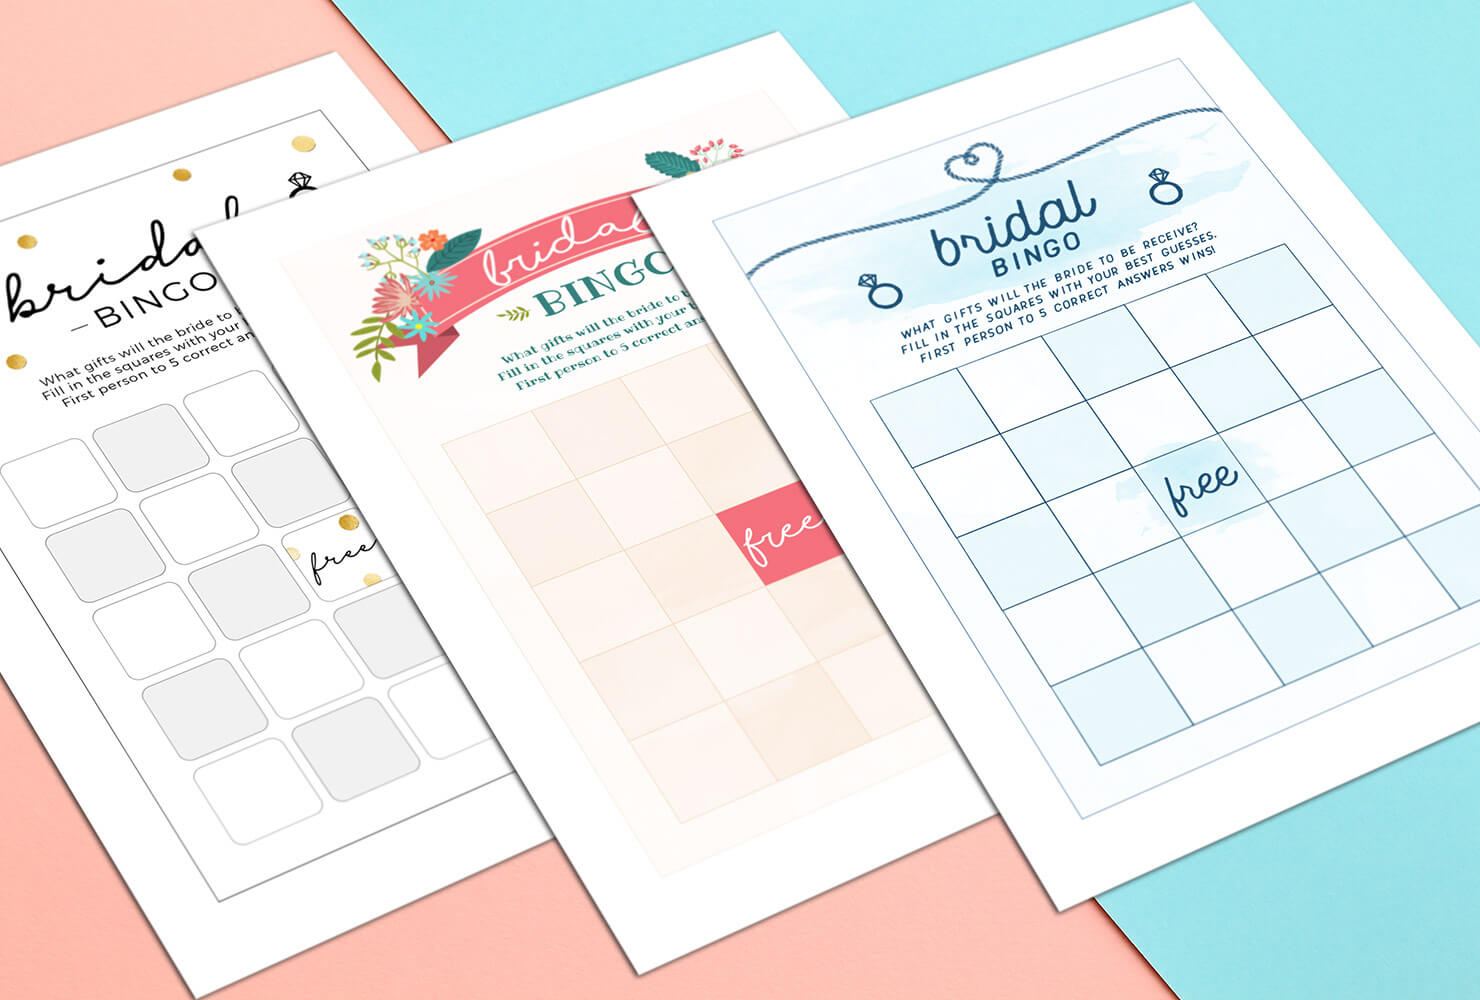 How To Play Bridal Shower Bingo (With Printables) | Shutterfly Pertaining To Blank Bridal Shower Bingo Template